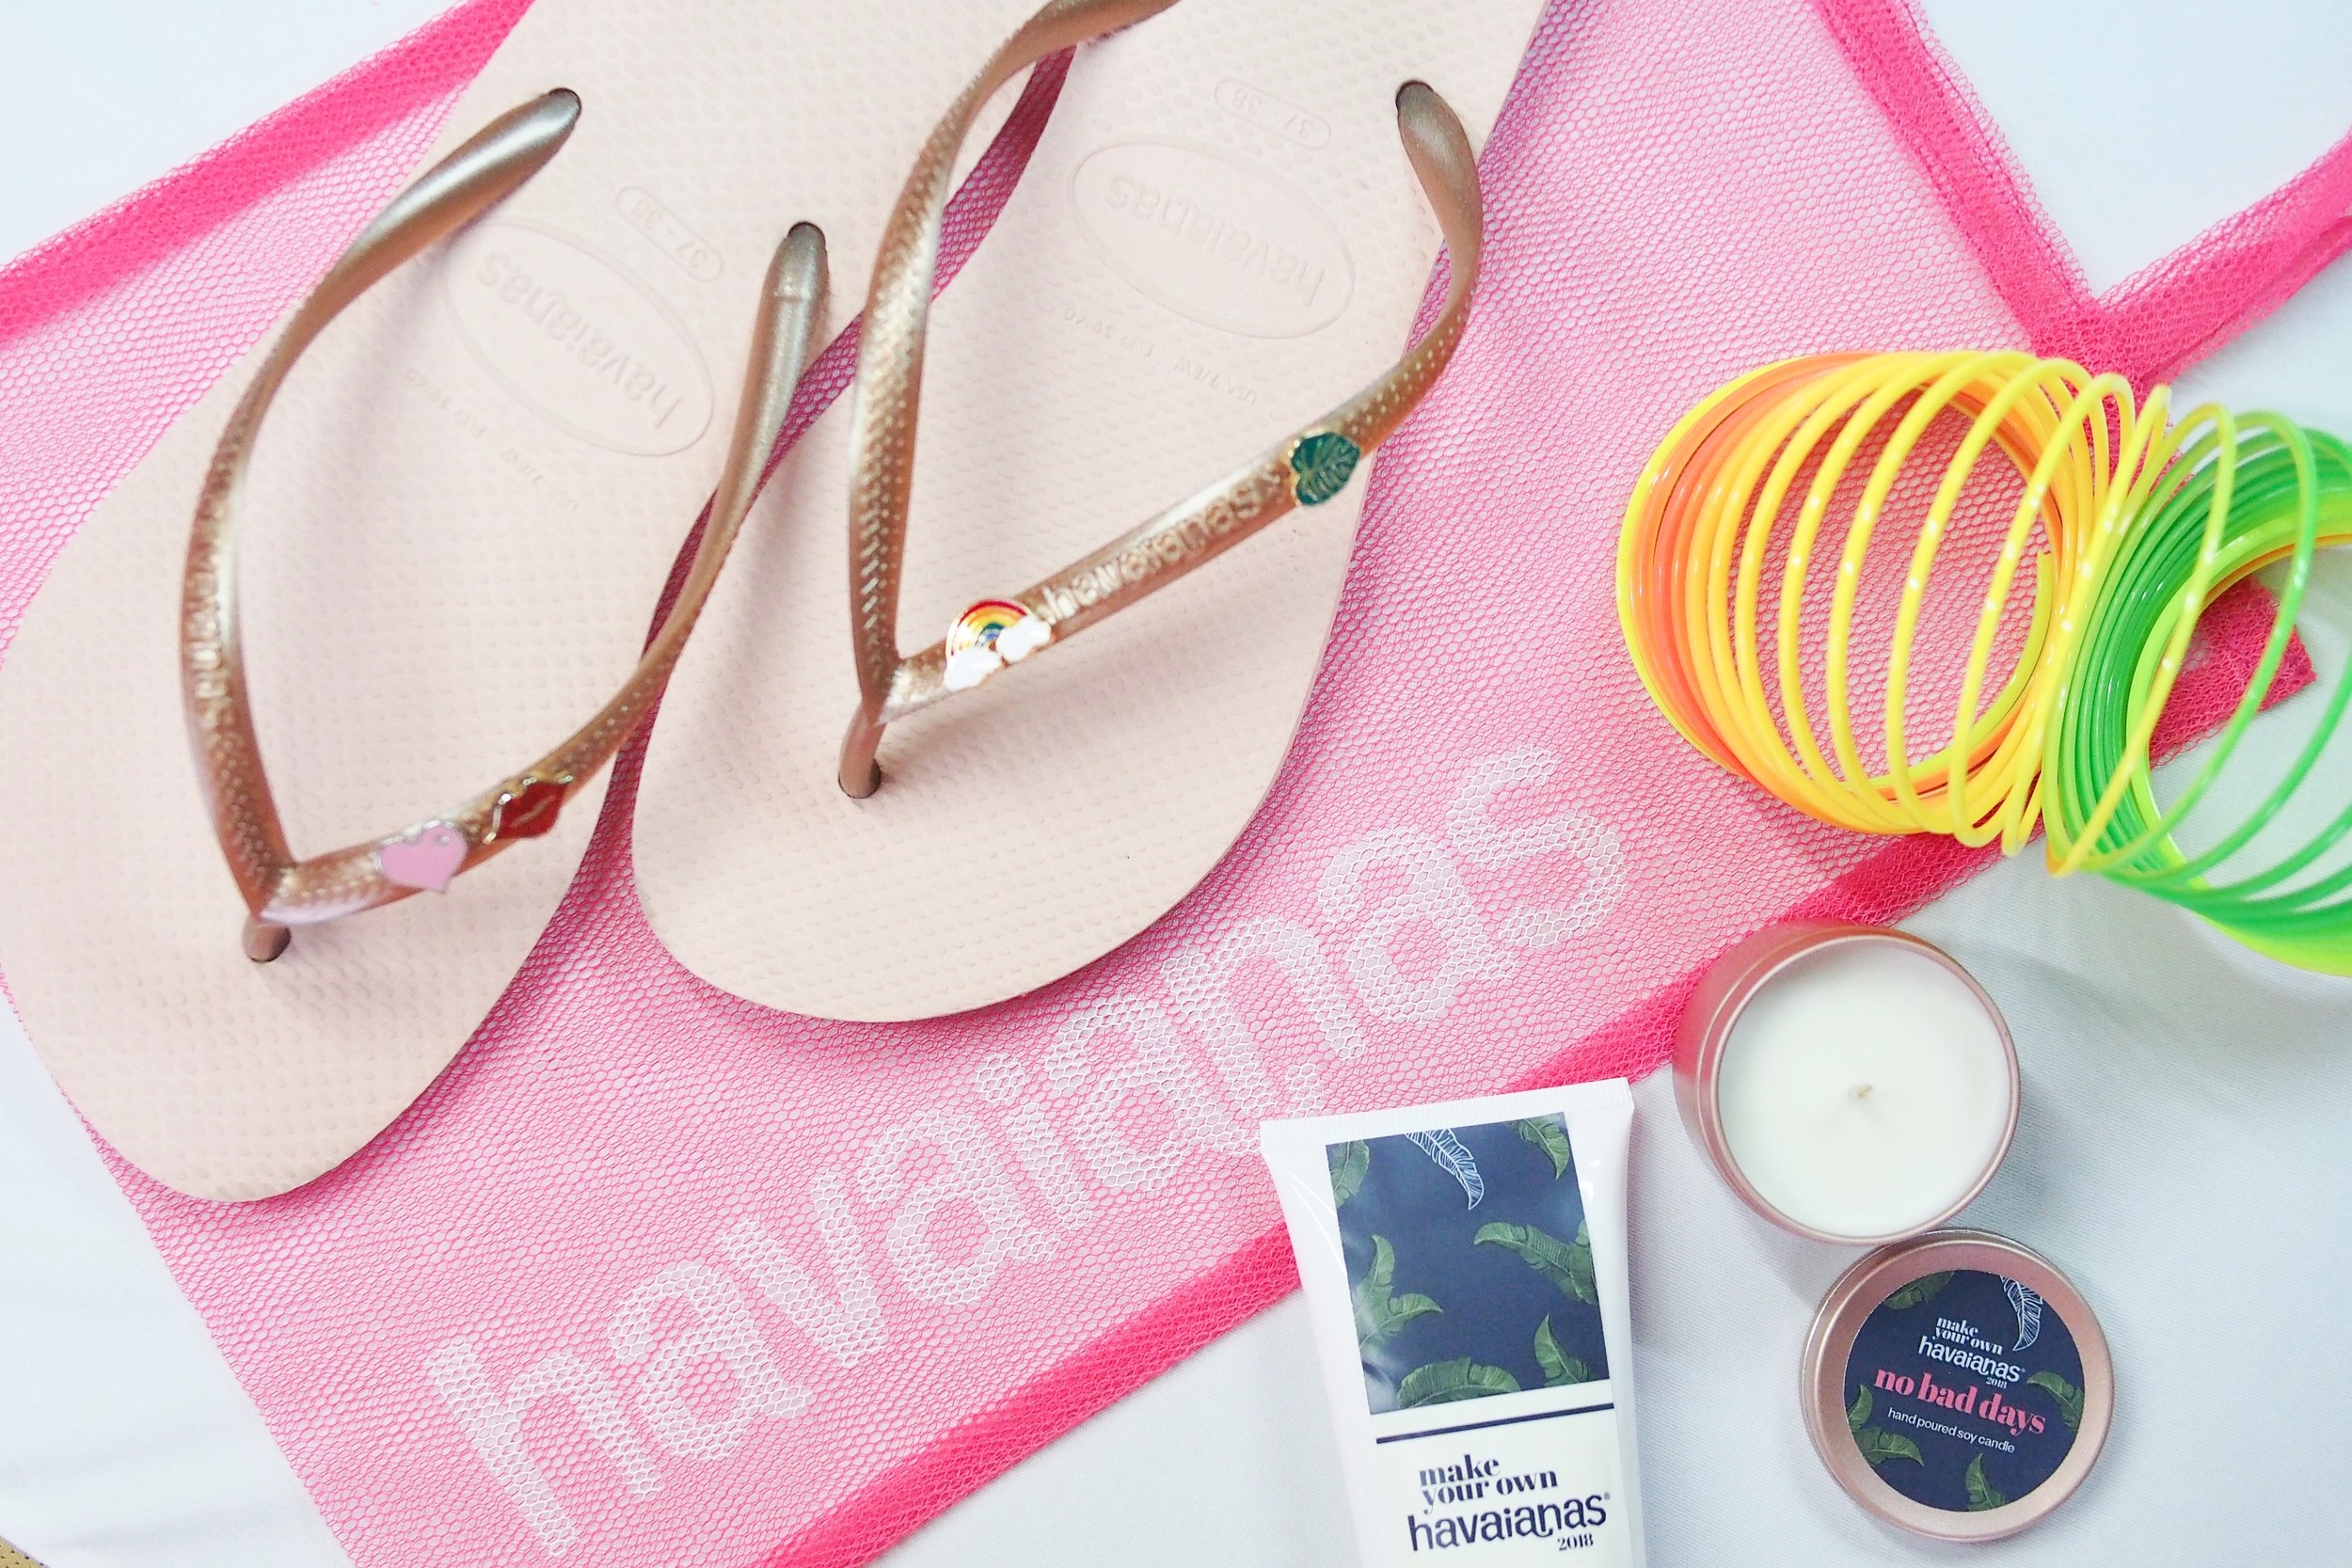 Own Havaianas 2018 event 